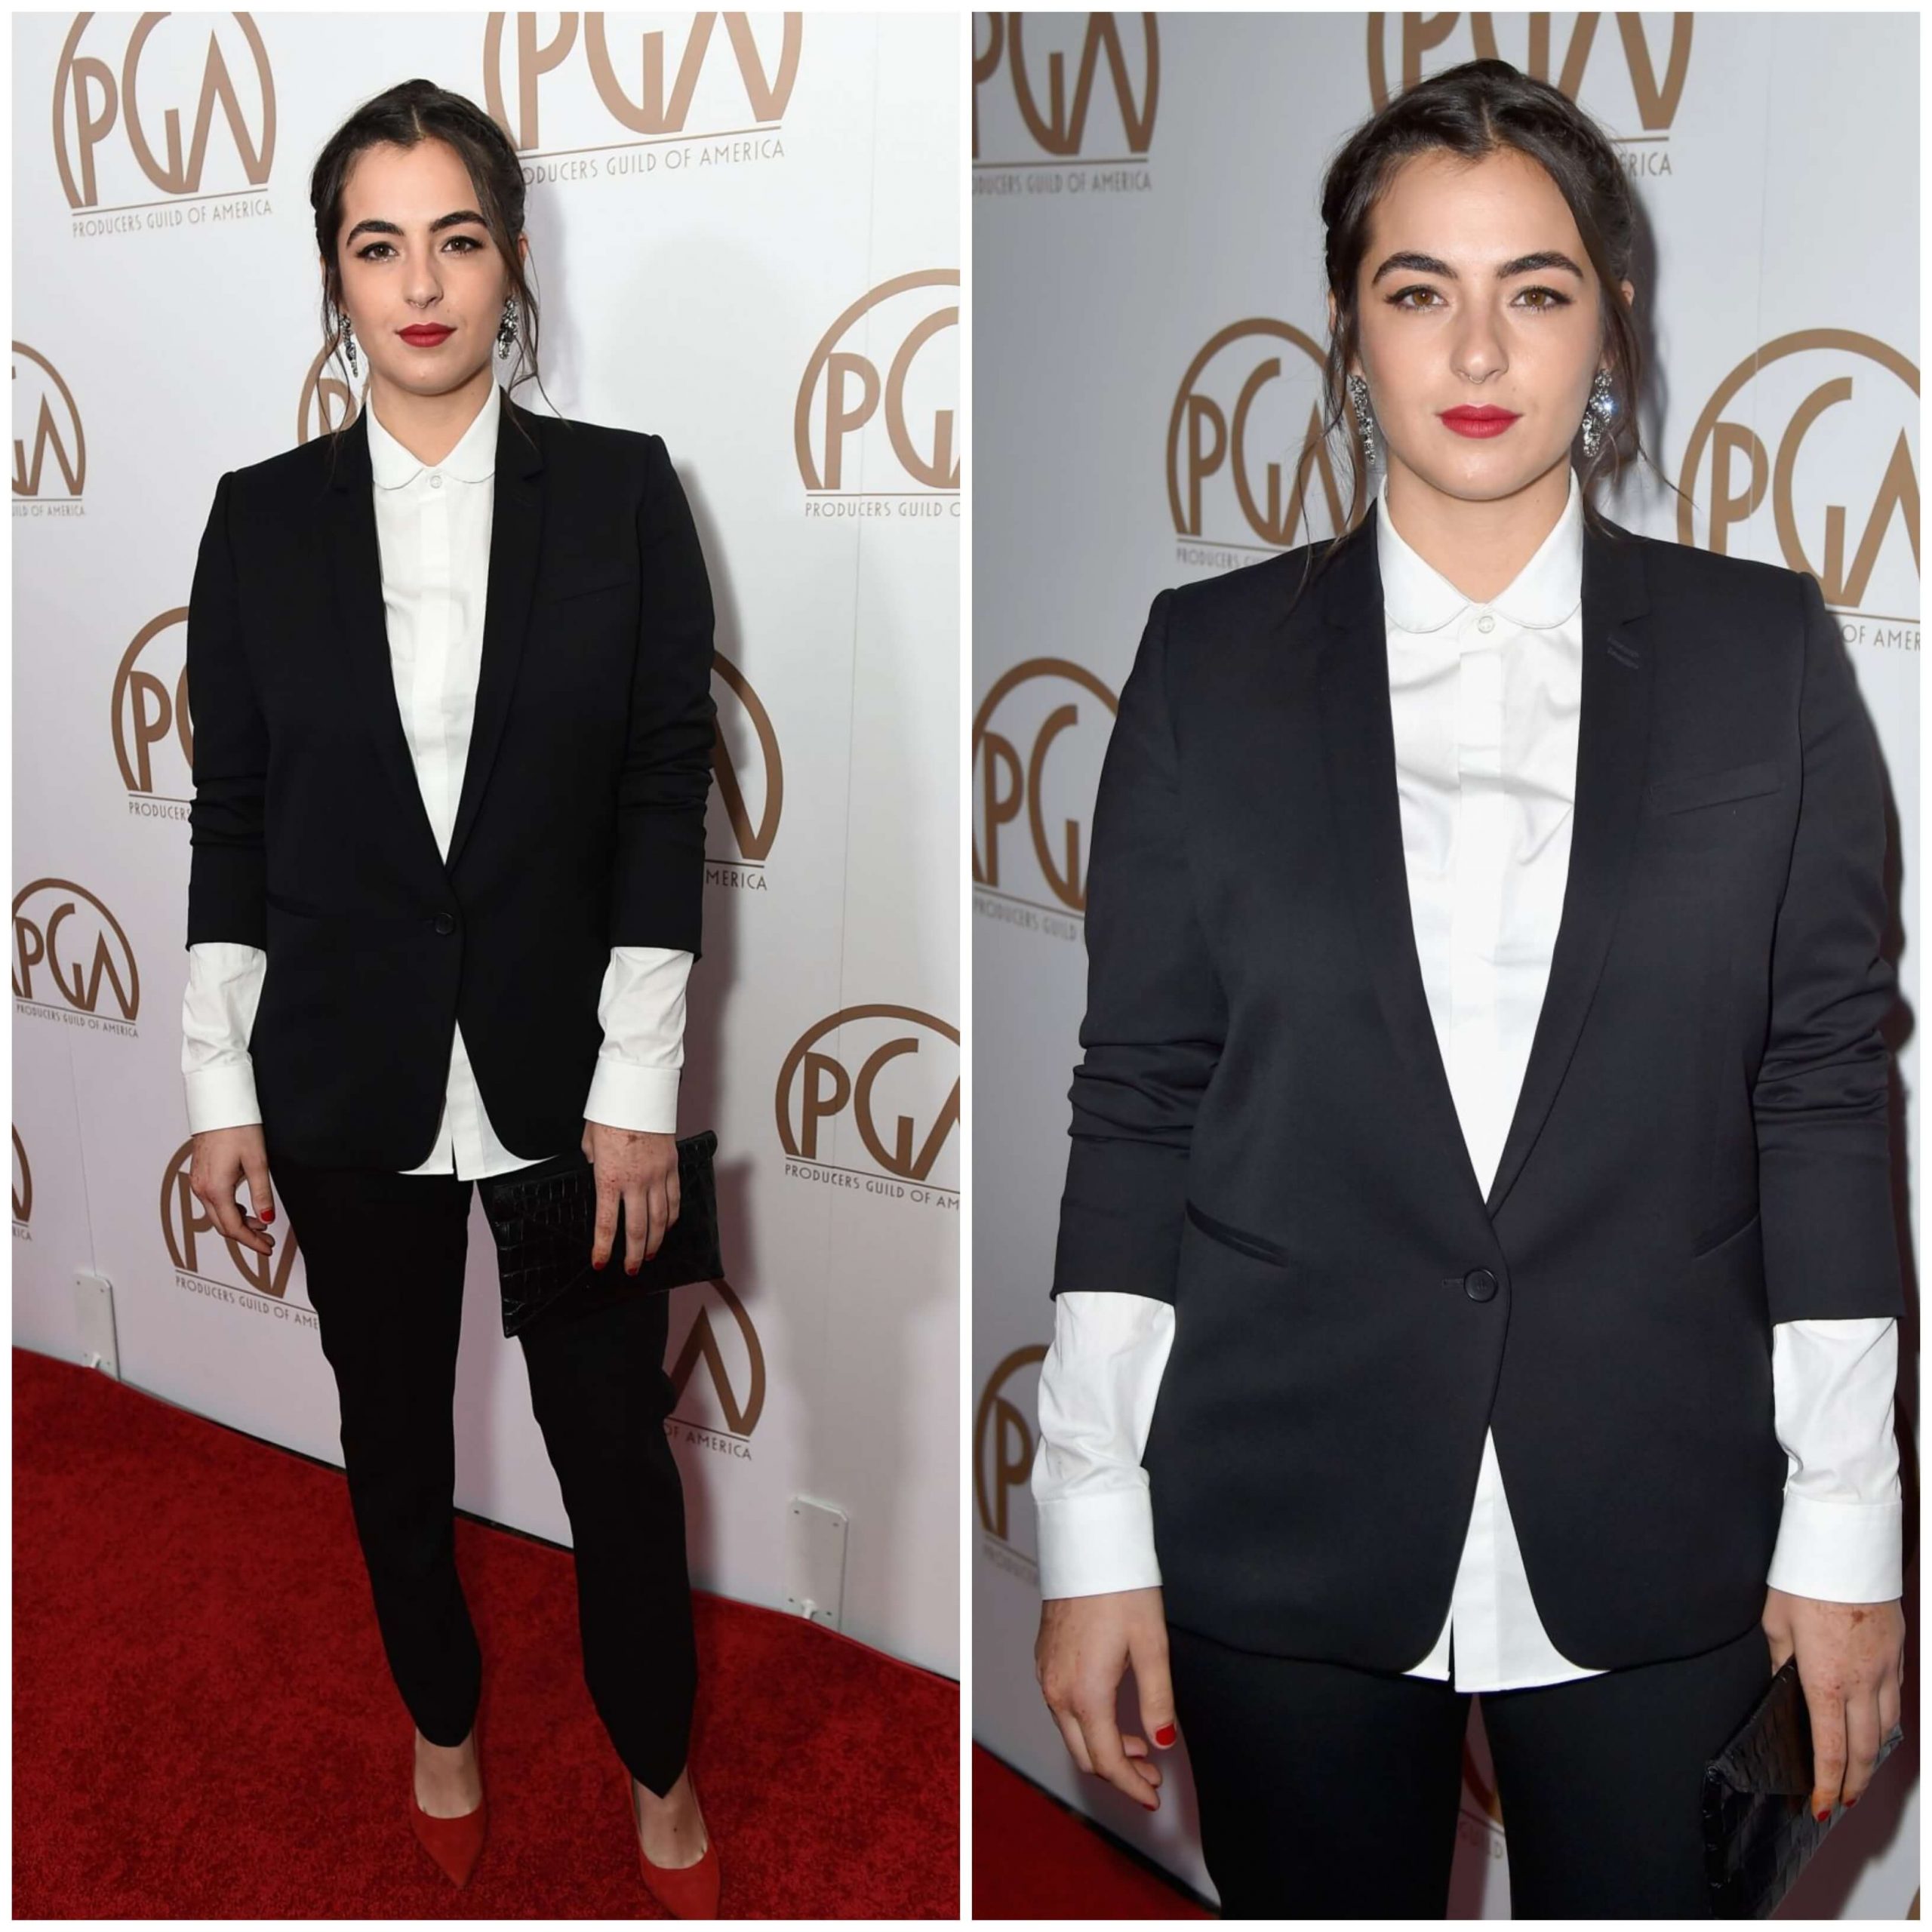 Alanna Masterson – In White Collar Shirt With Blazer Outfits -  2015 Producers Guild Awards in Los Angeles